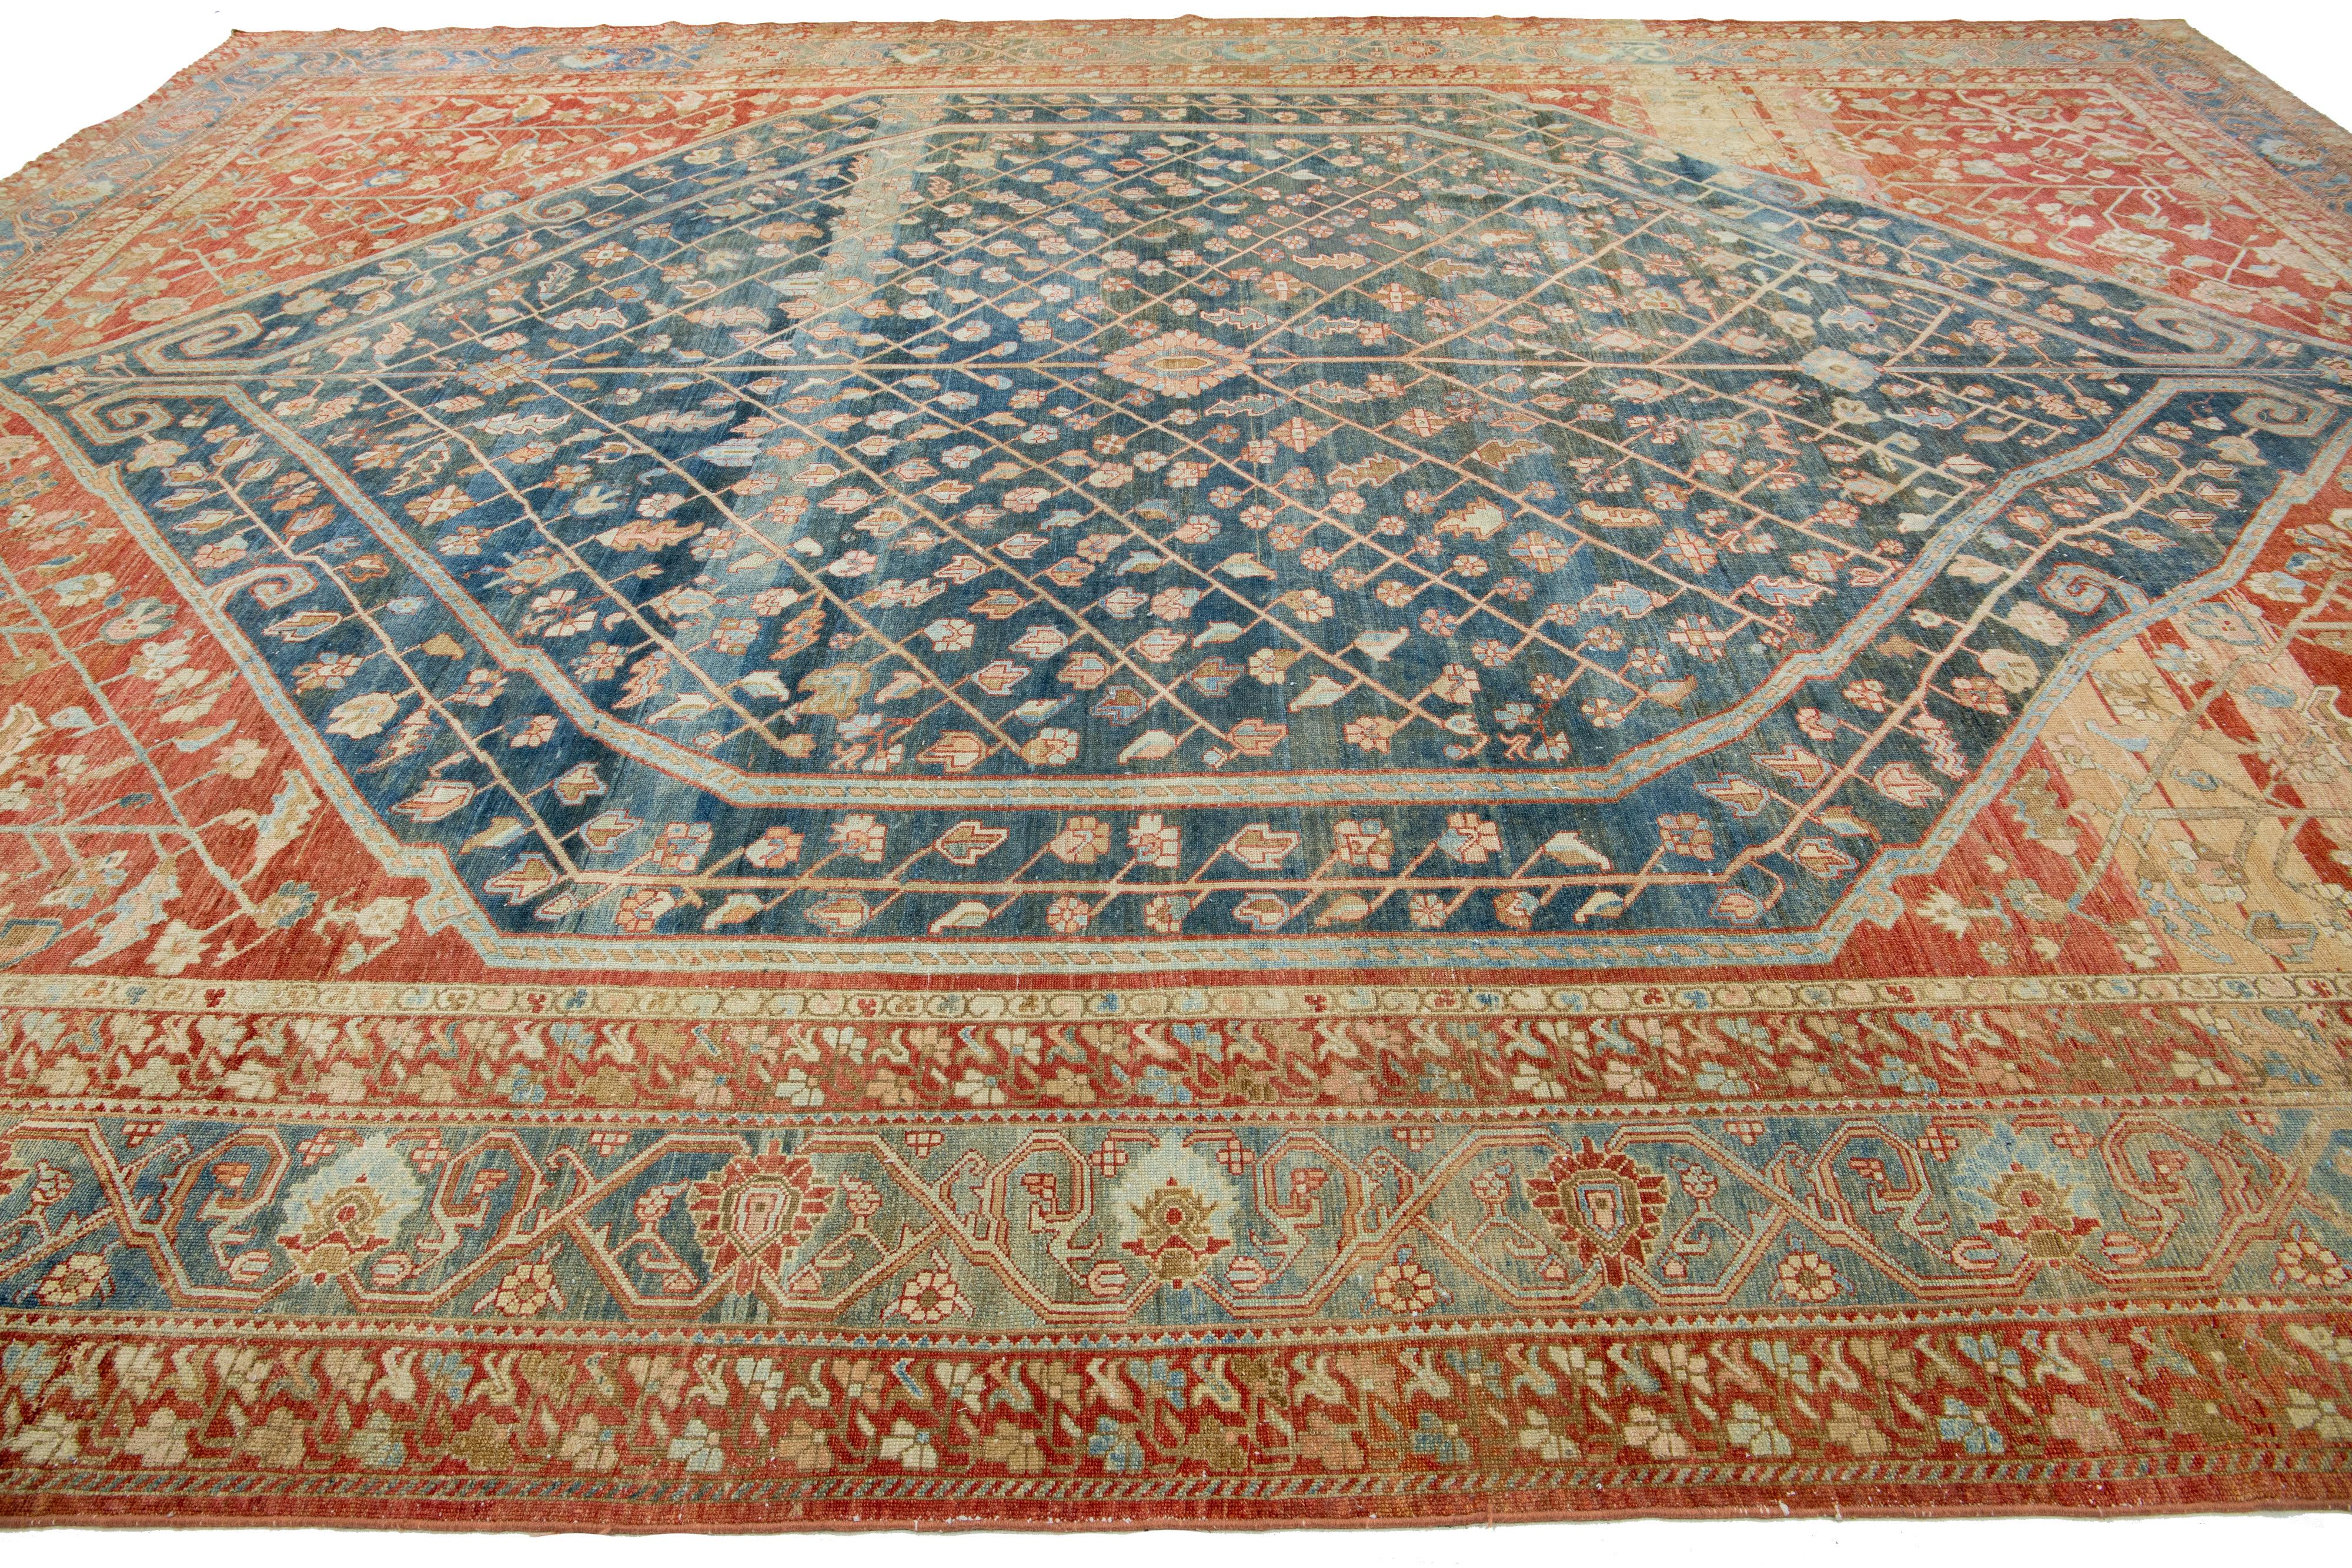 Hand-Knotted Allover 1920s Antique Persian Bakhtiari Wool Rug In Blue & Red-Rust Color  For Sale